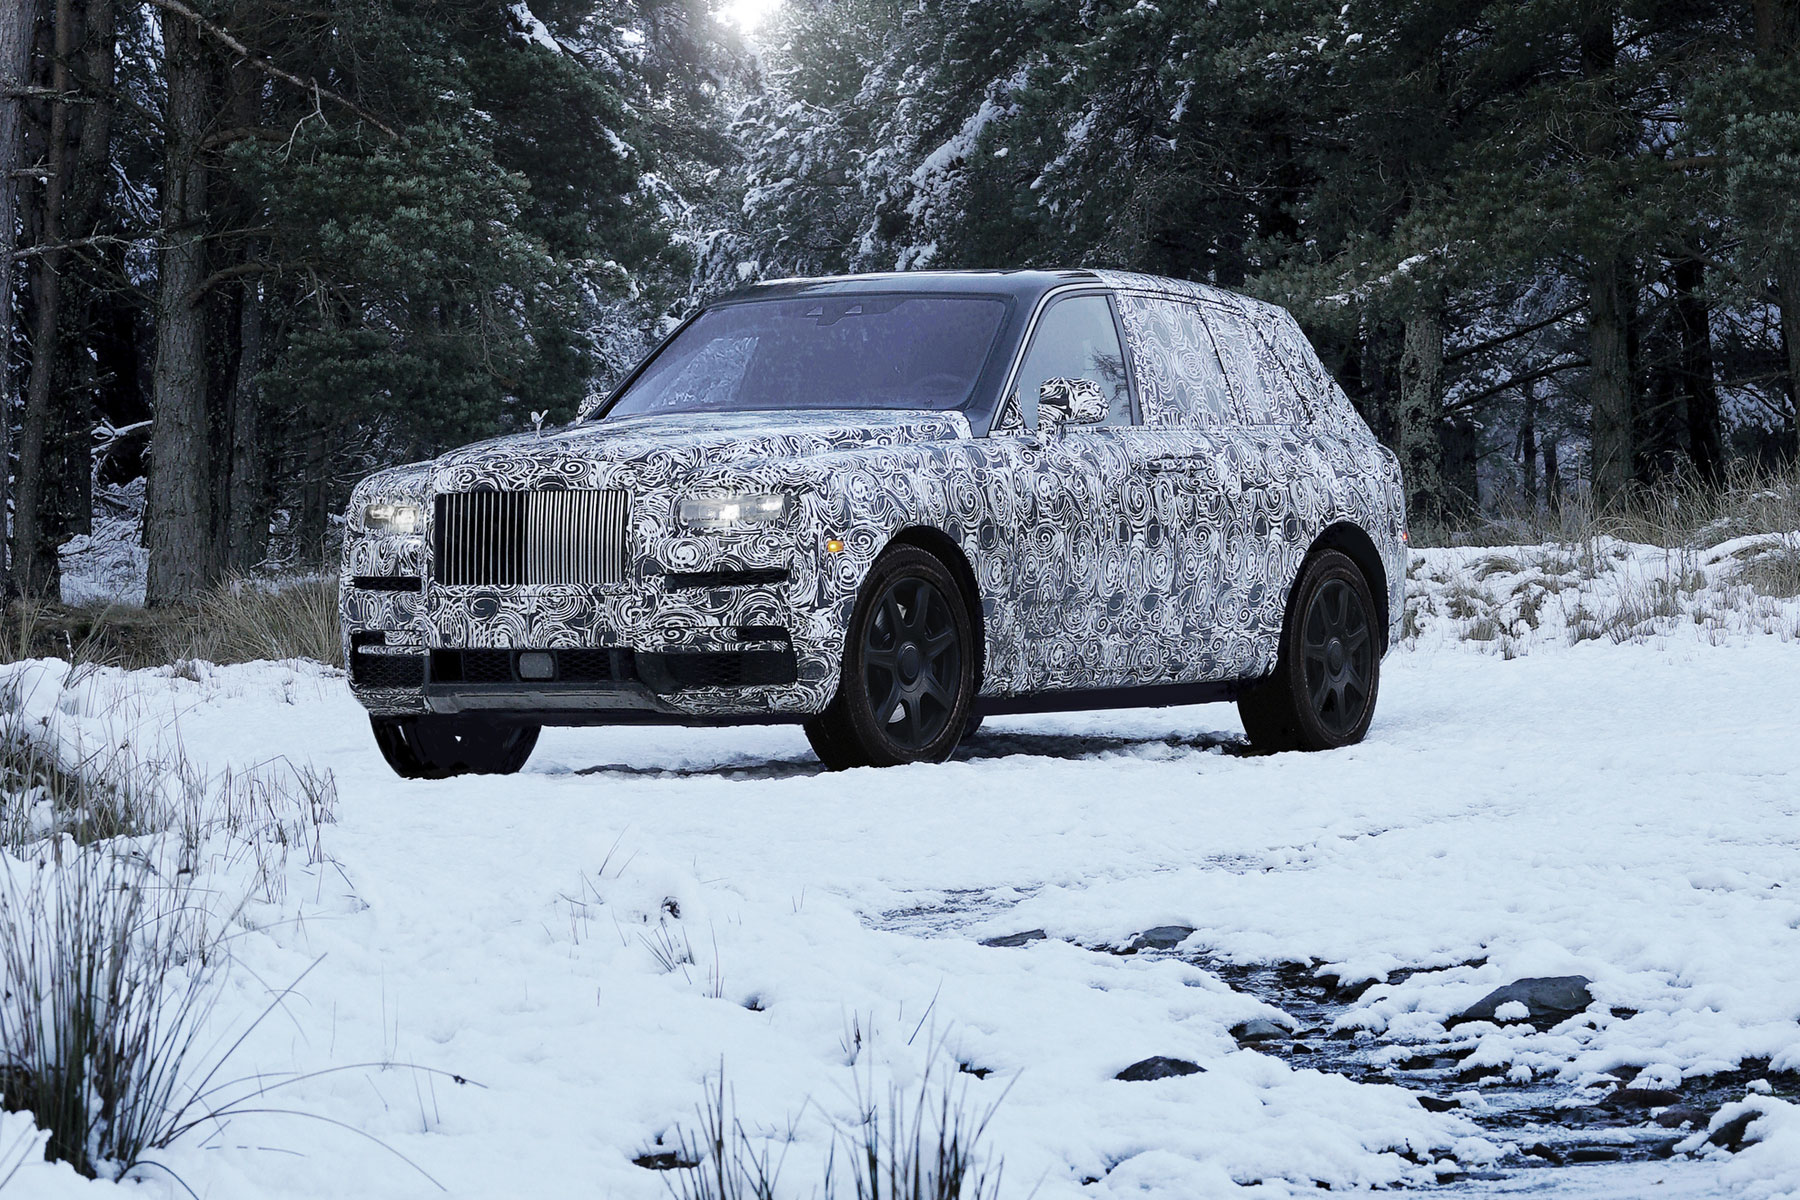 World's Most Expensive Toy Car, Rolls Royce Cullinan